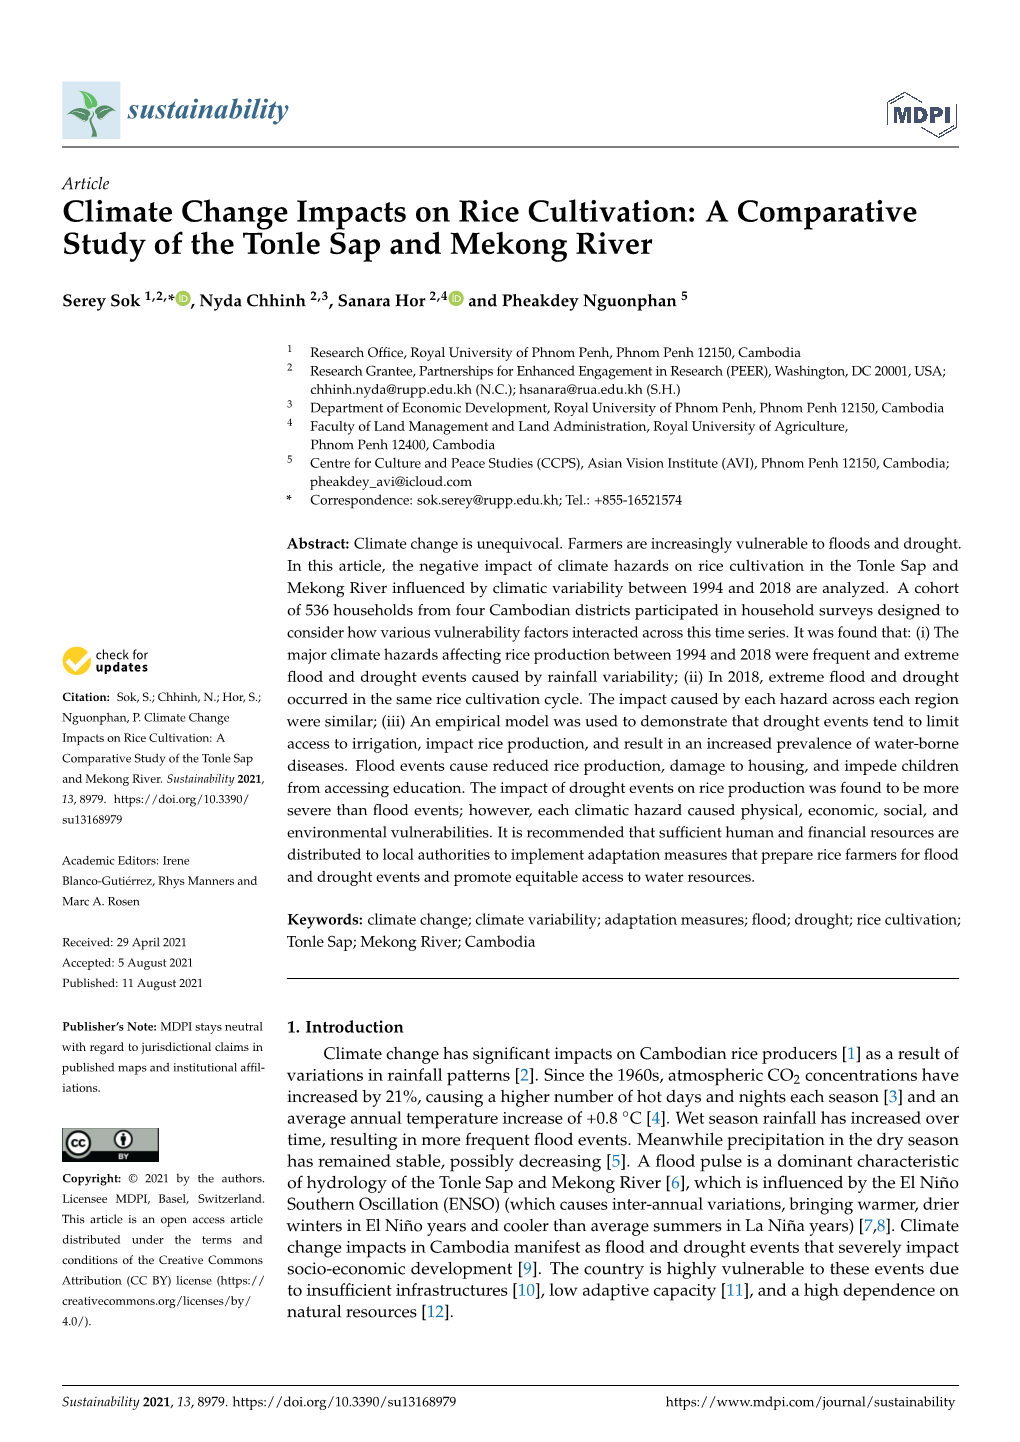 Climate Change Impacts on Rice Cultivation: a Comparative Study of the Tonle Sap and Mekong River